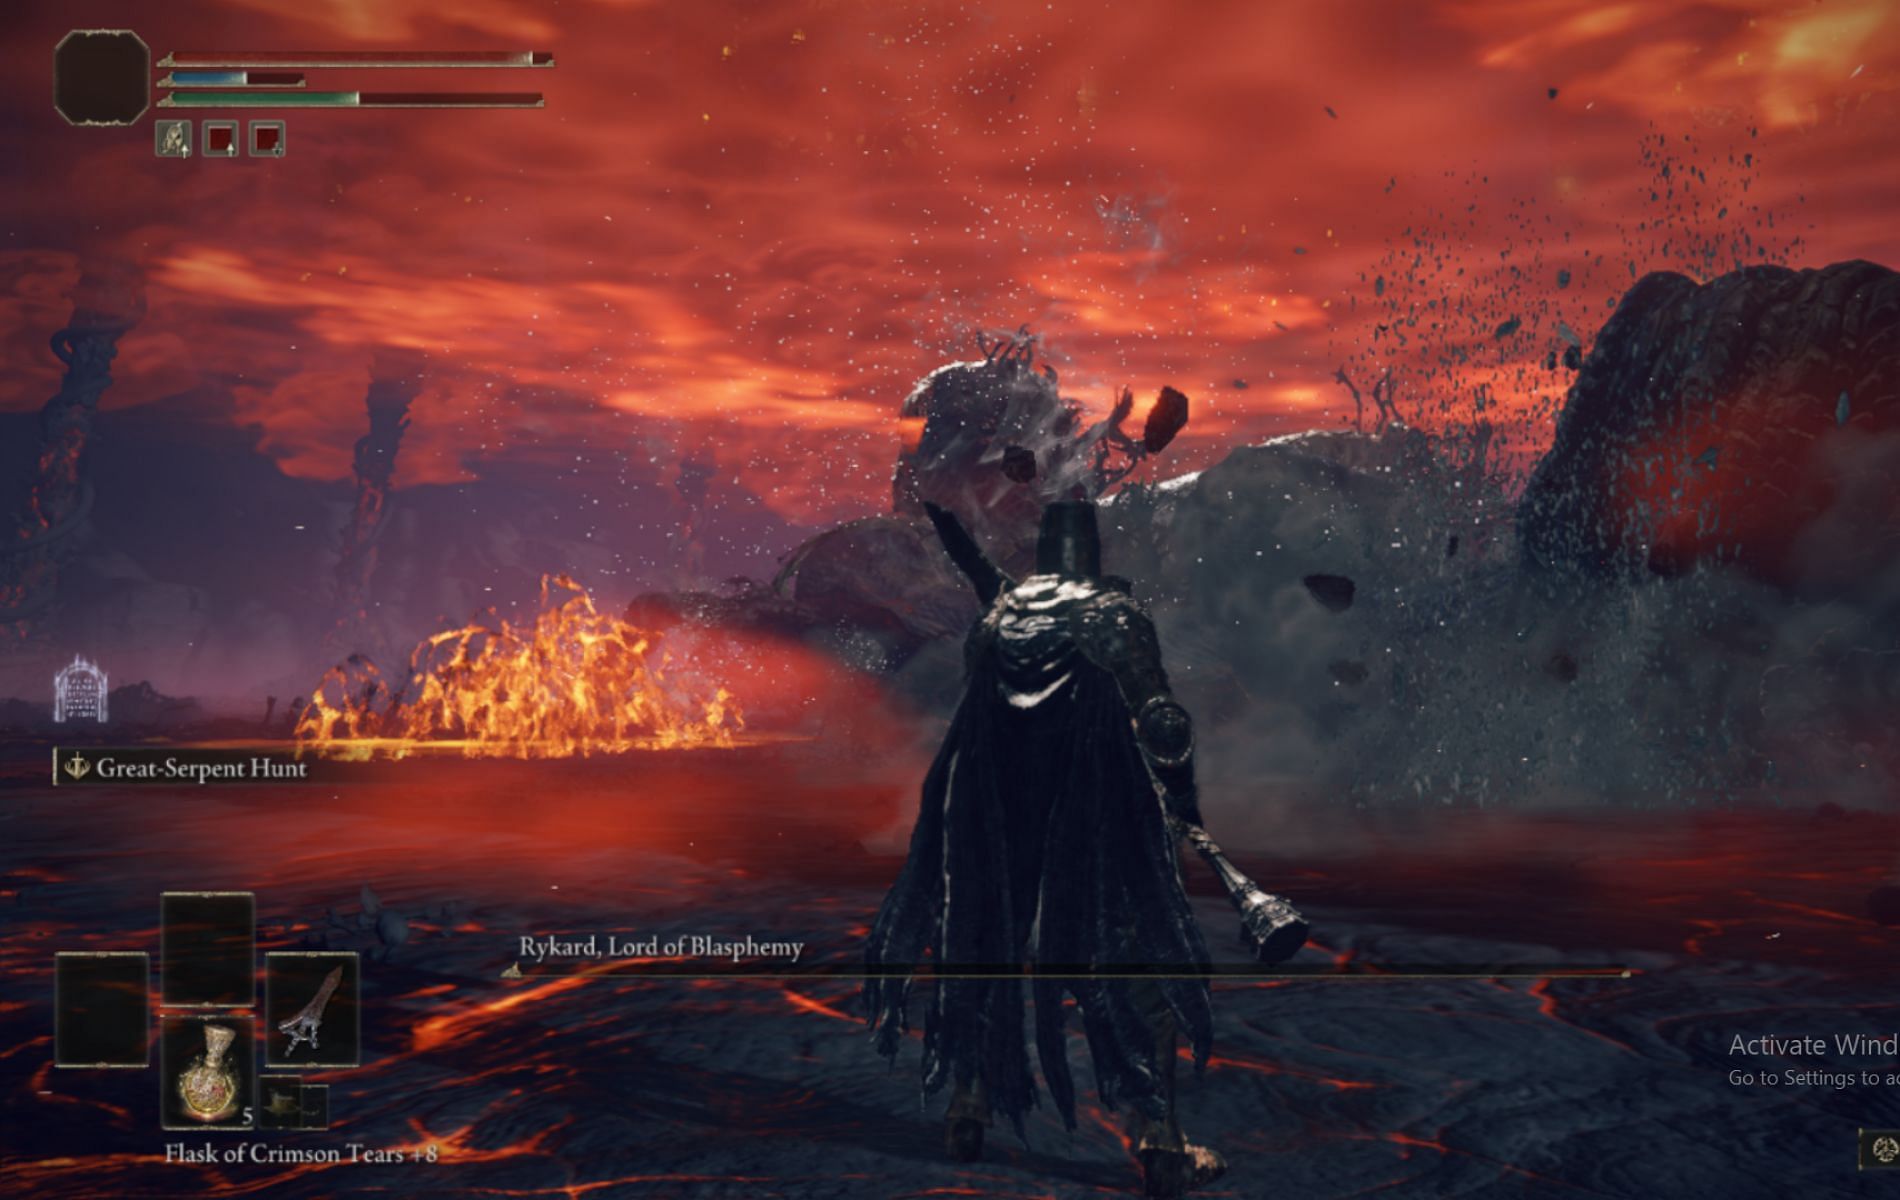 Grab the spear to make the fight even. (Image via FromSoftware)